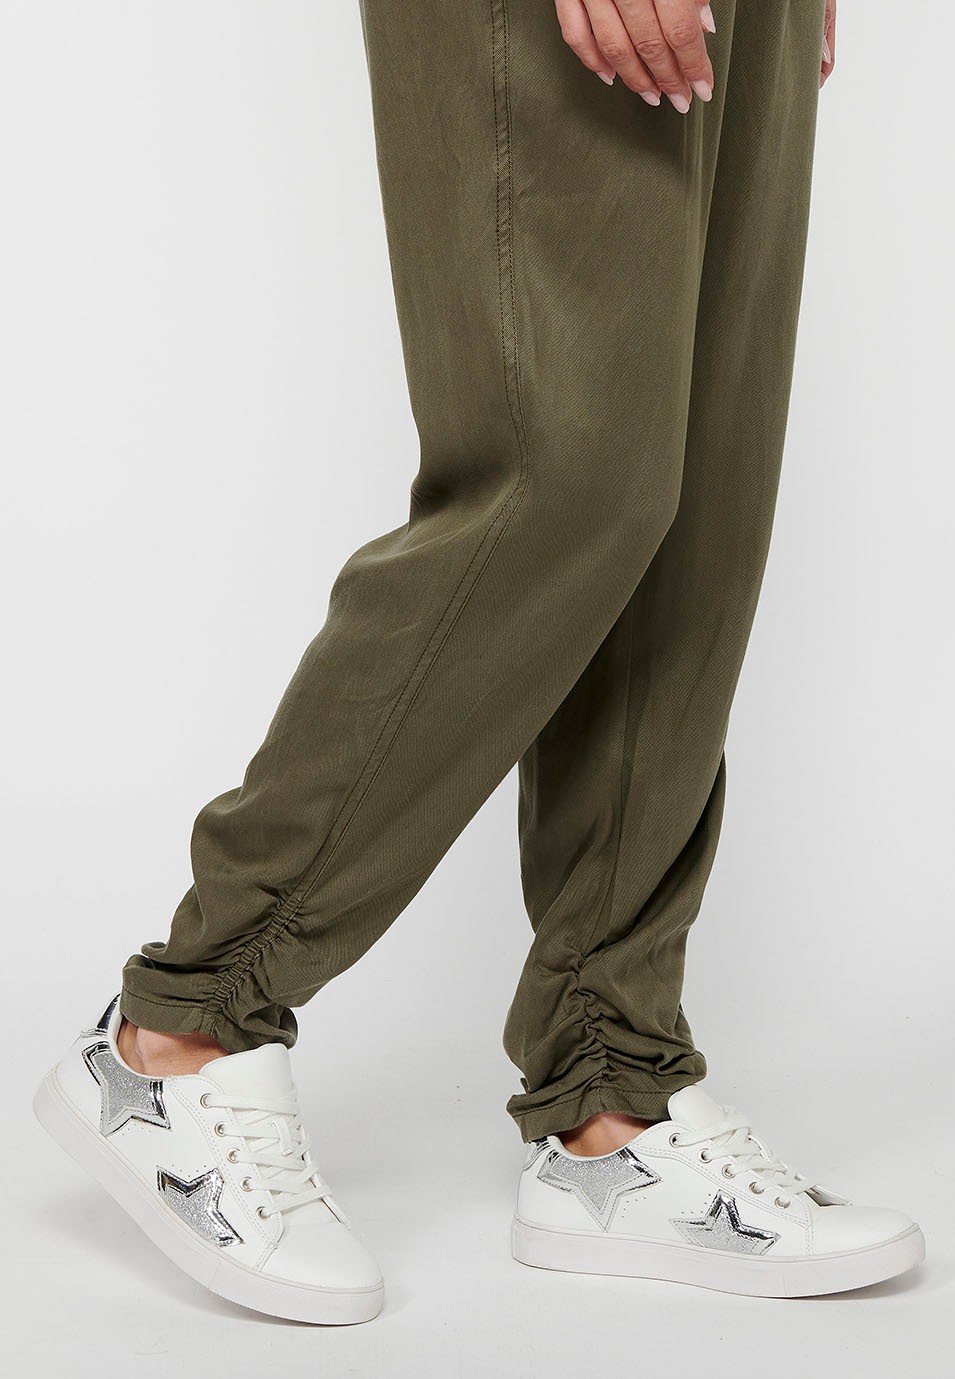 Long jogger pants with curled finish and rubberized waist with four pockets, two rear pockets with flap in Khaki color for women 8